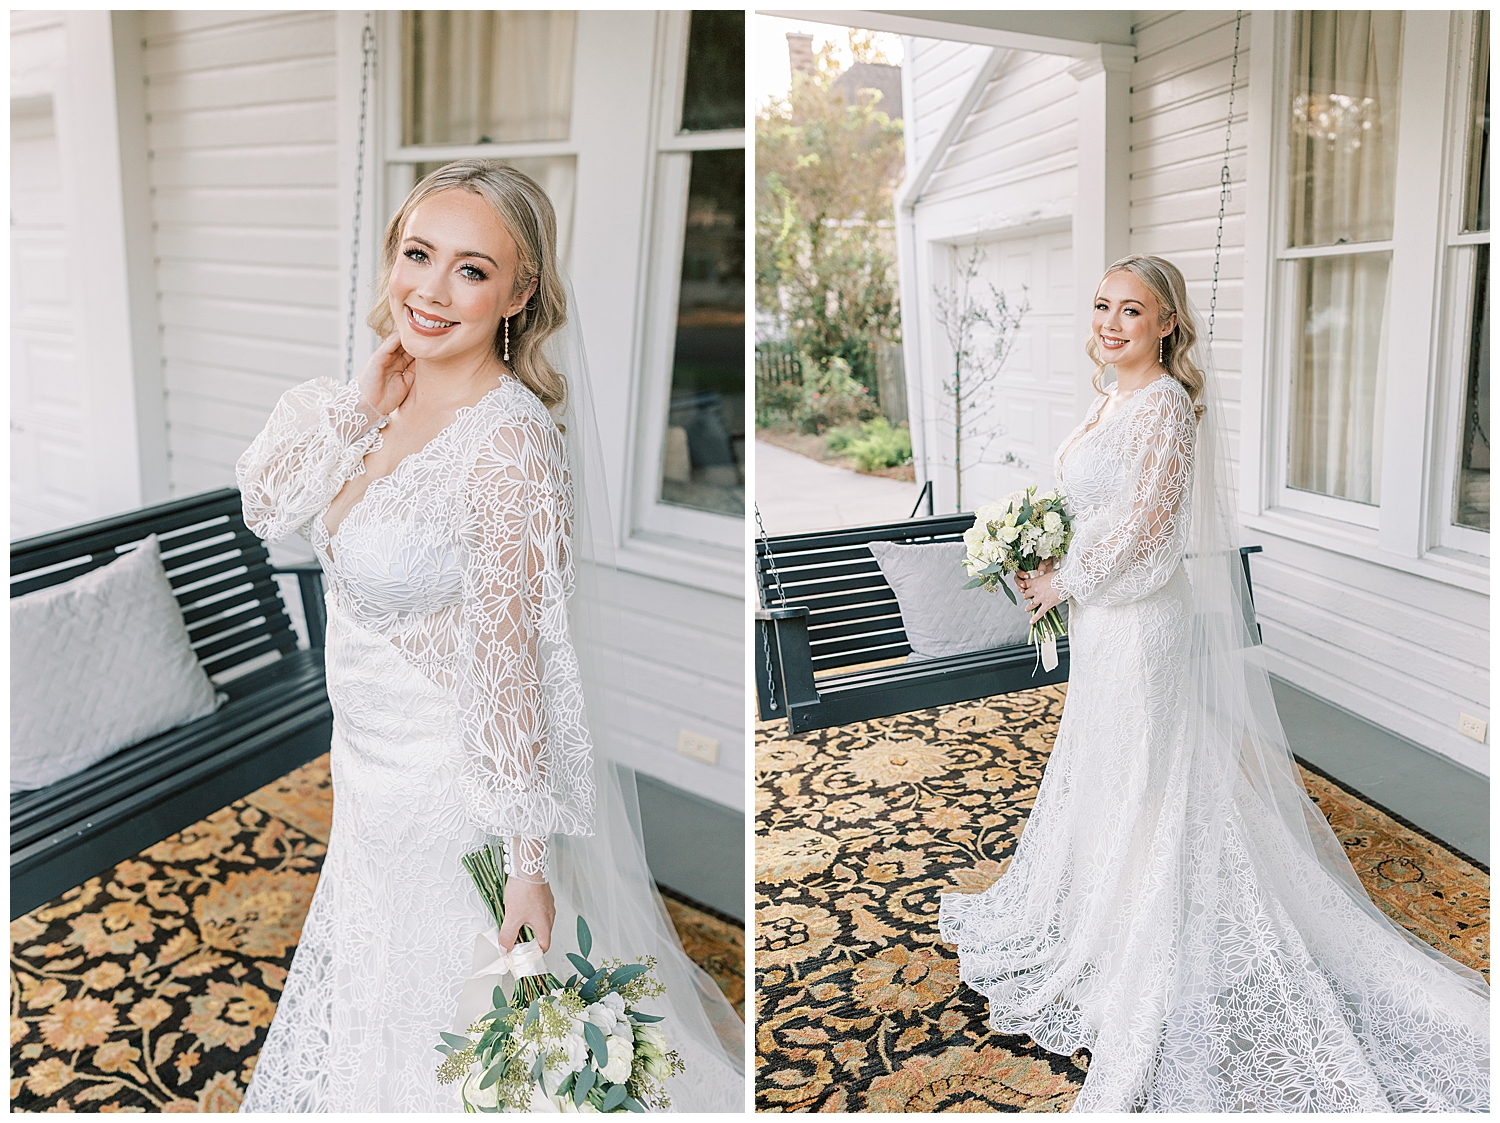 A bride stands on the porch.